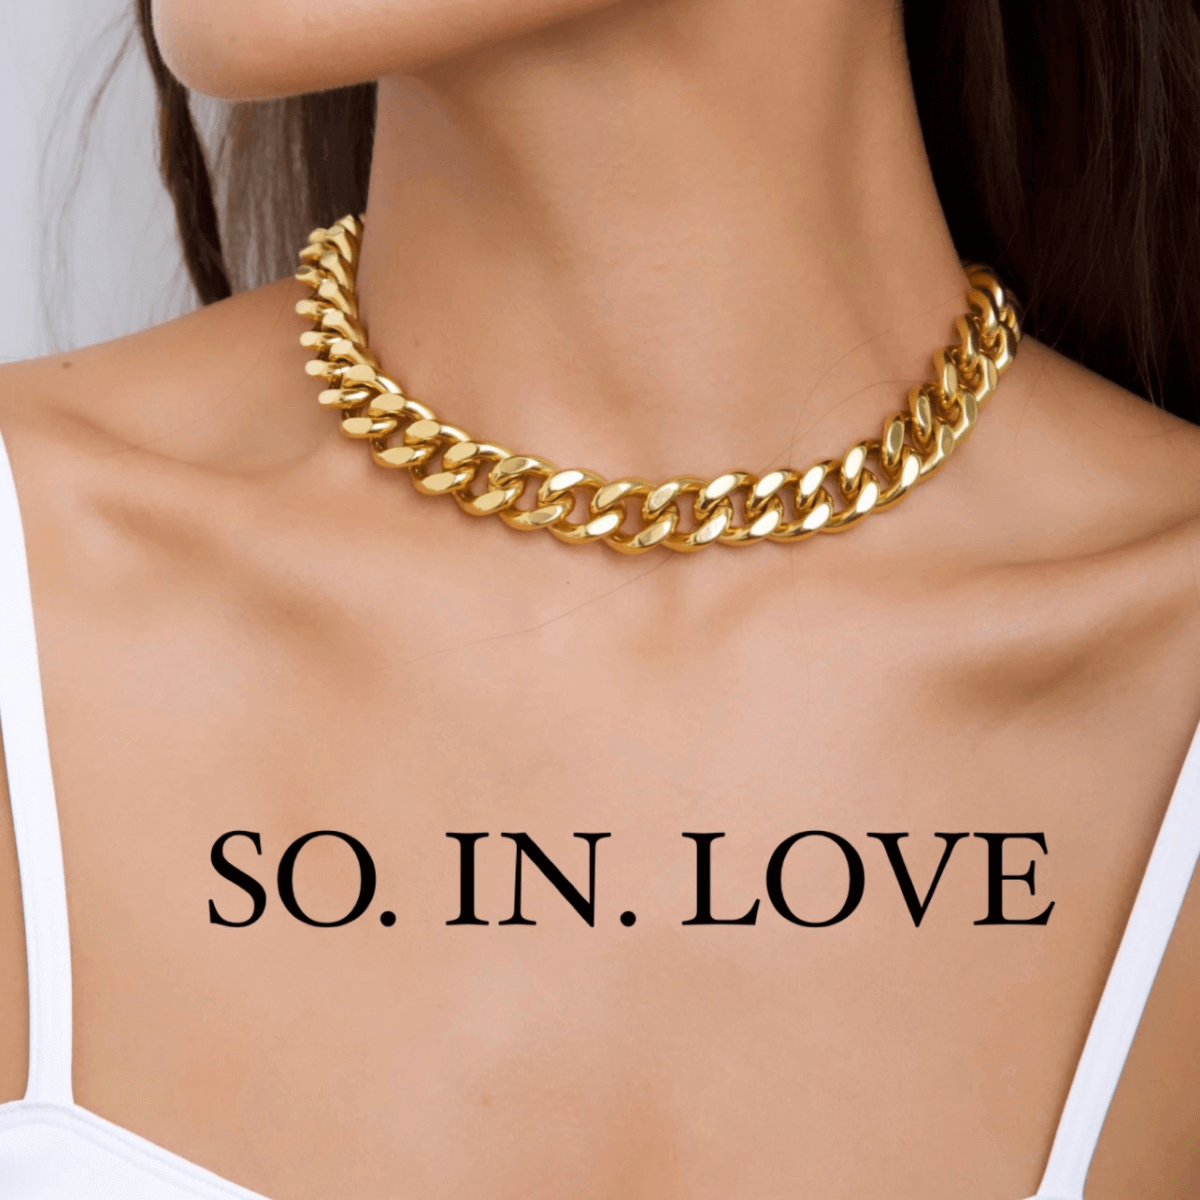 Best Gold Link Chain Necklace | Best Aesthetic Yellow Gold Graduated Link Necklace Chain Jewelry Gift for Women, Mother, Wife | Mason & Madison Co.